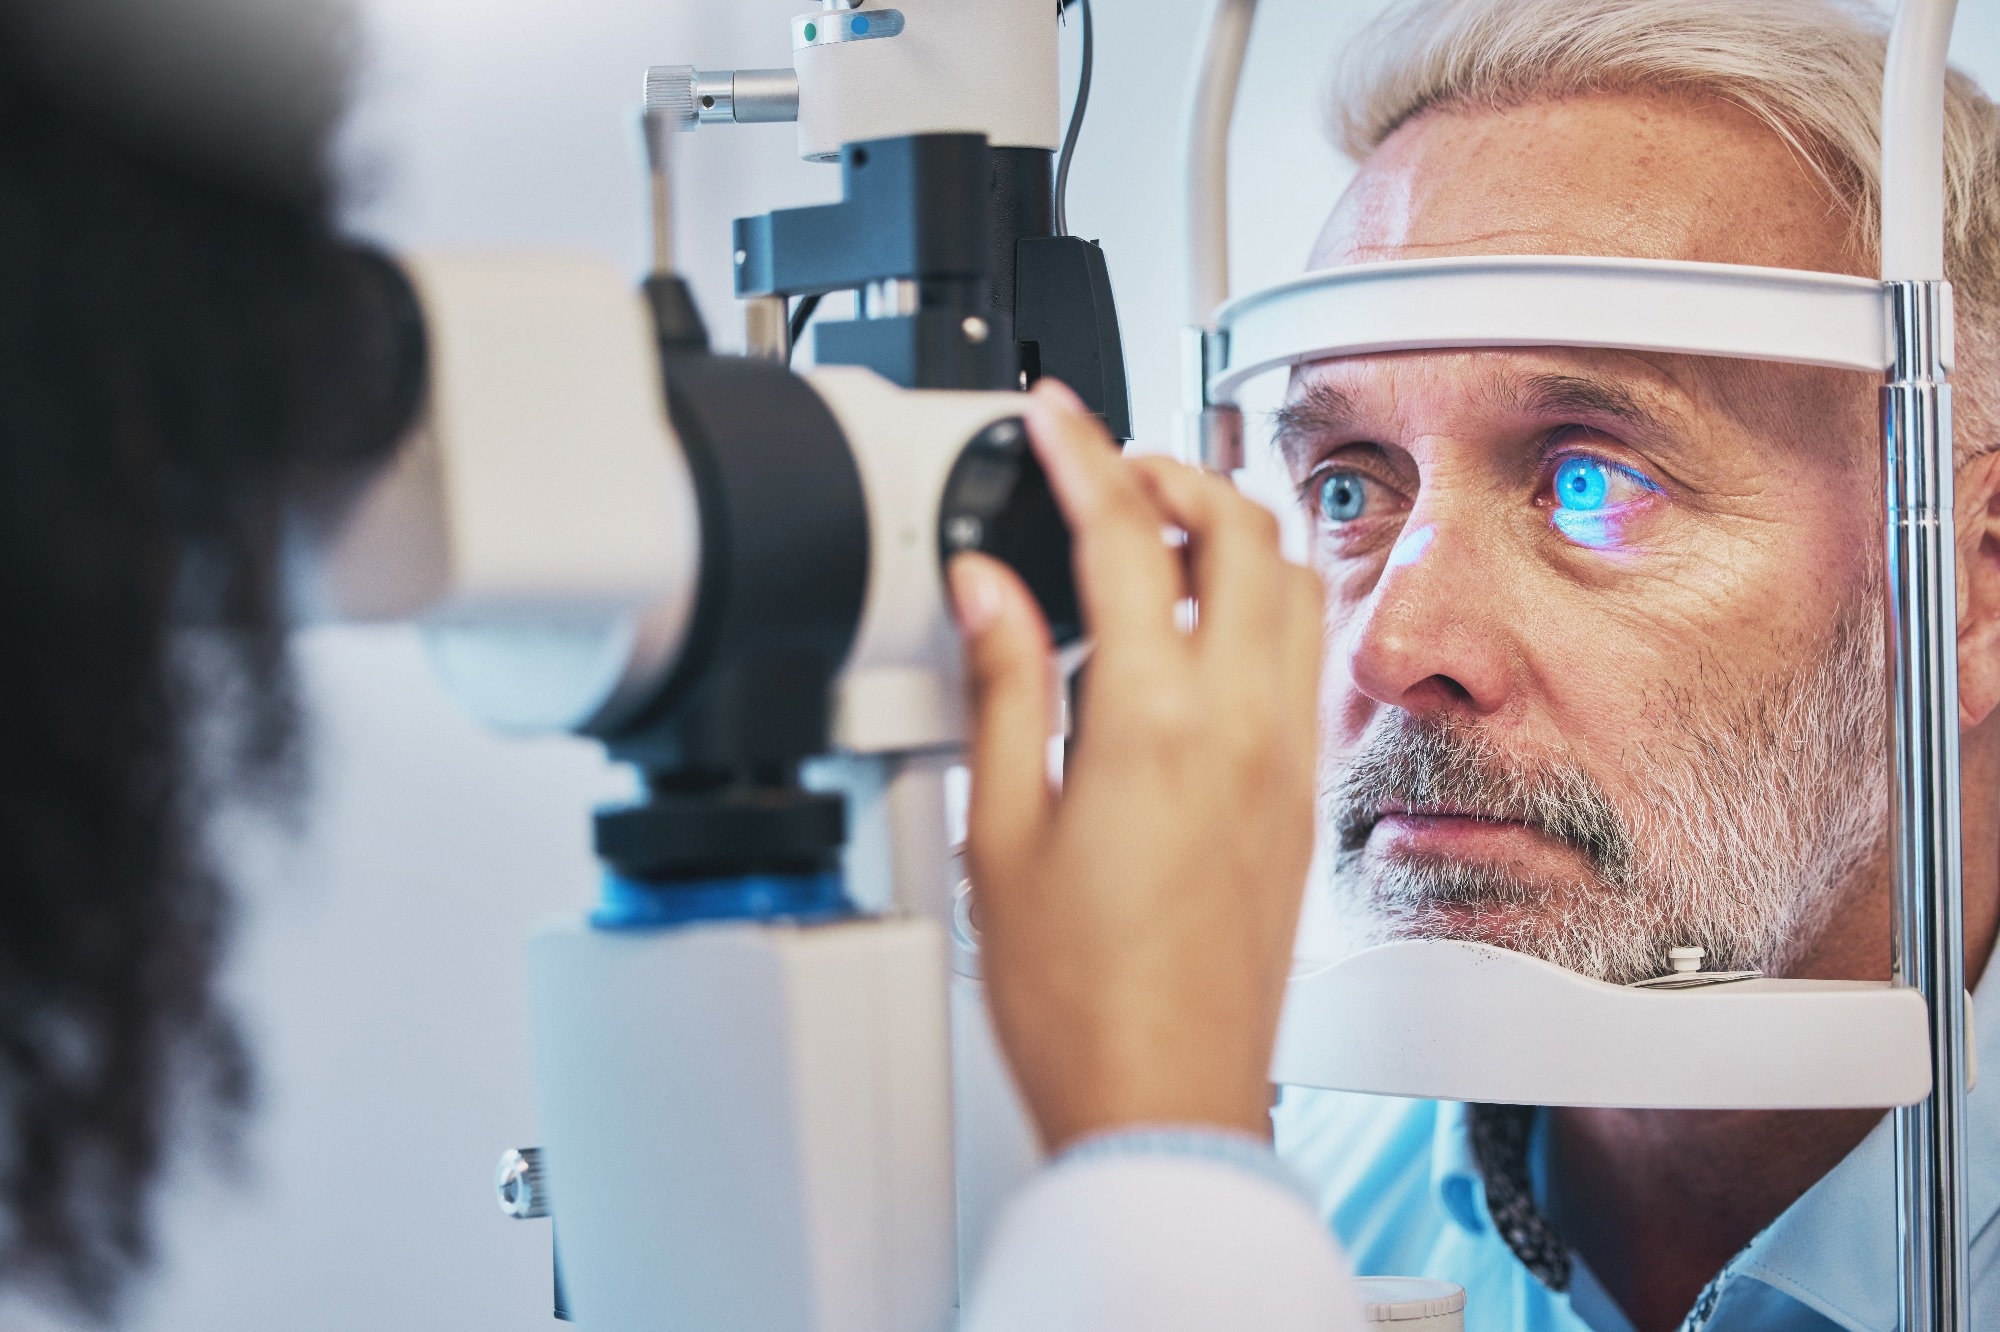 Study: Cannabis use and the risk of primary open-angle glaucoma: A Mendelian randomization study. Image Credit: PeopleImages.com - Yuri A / Shutterstock.com